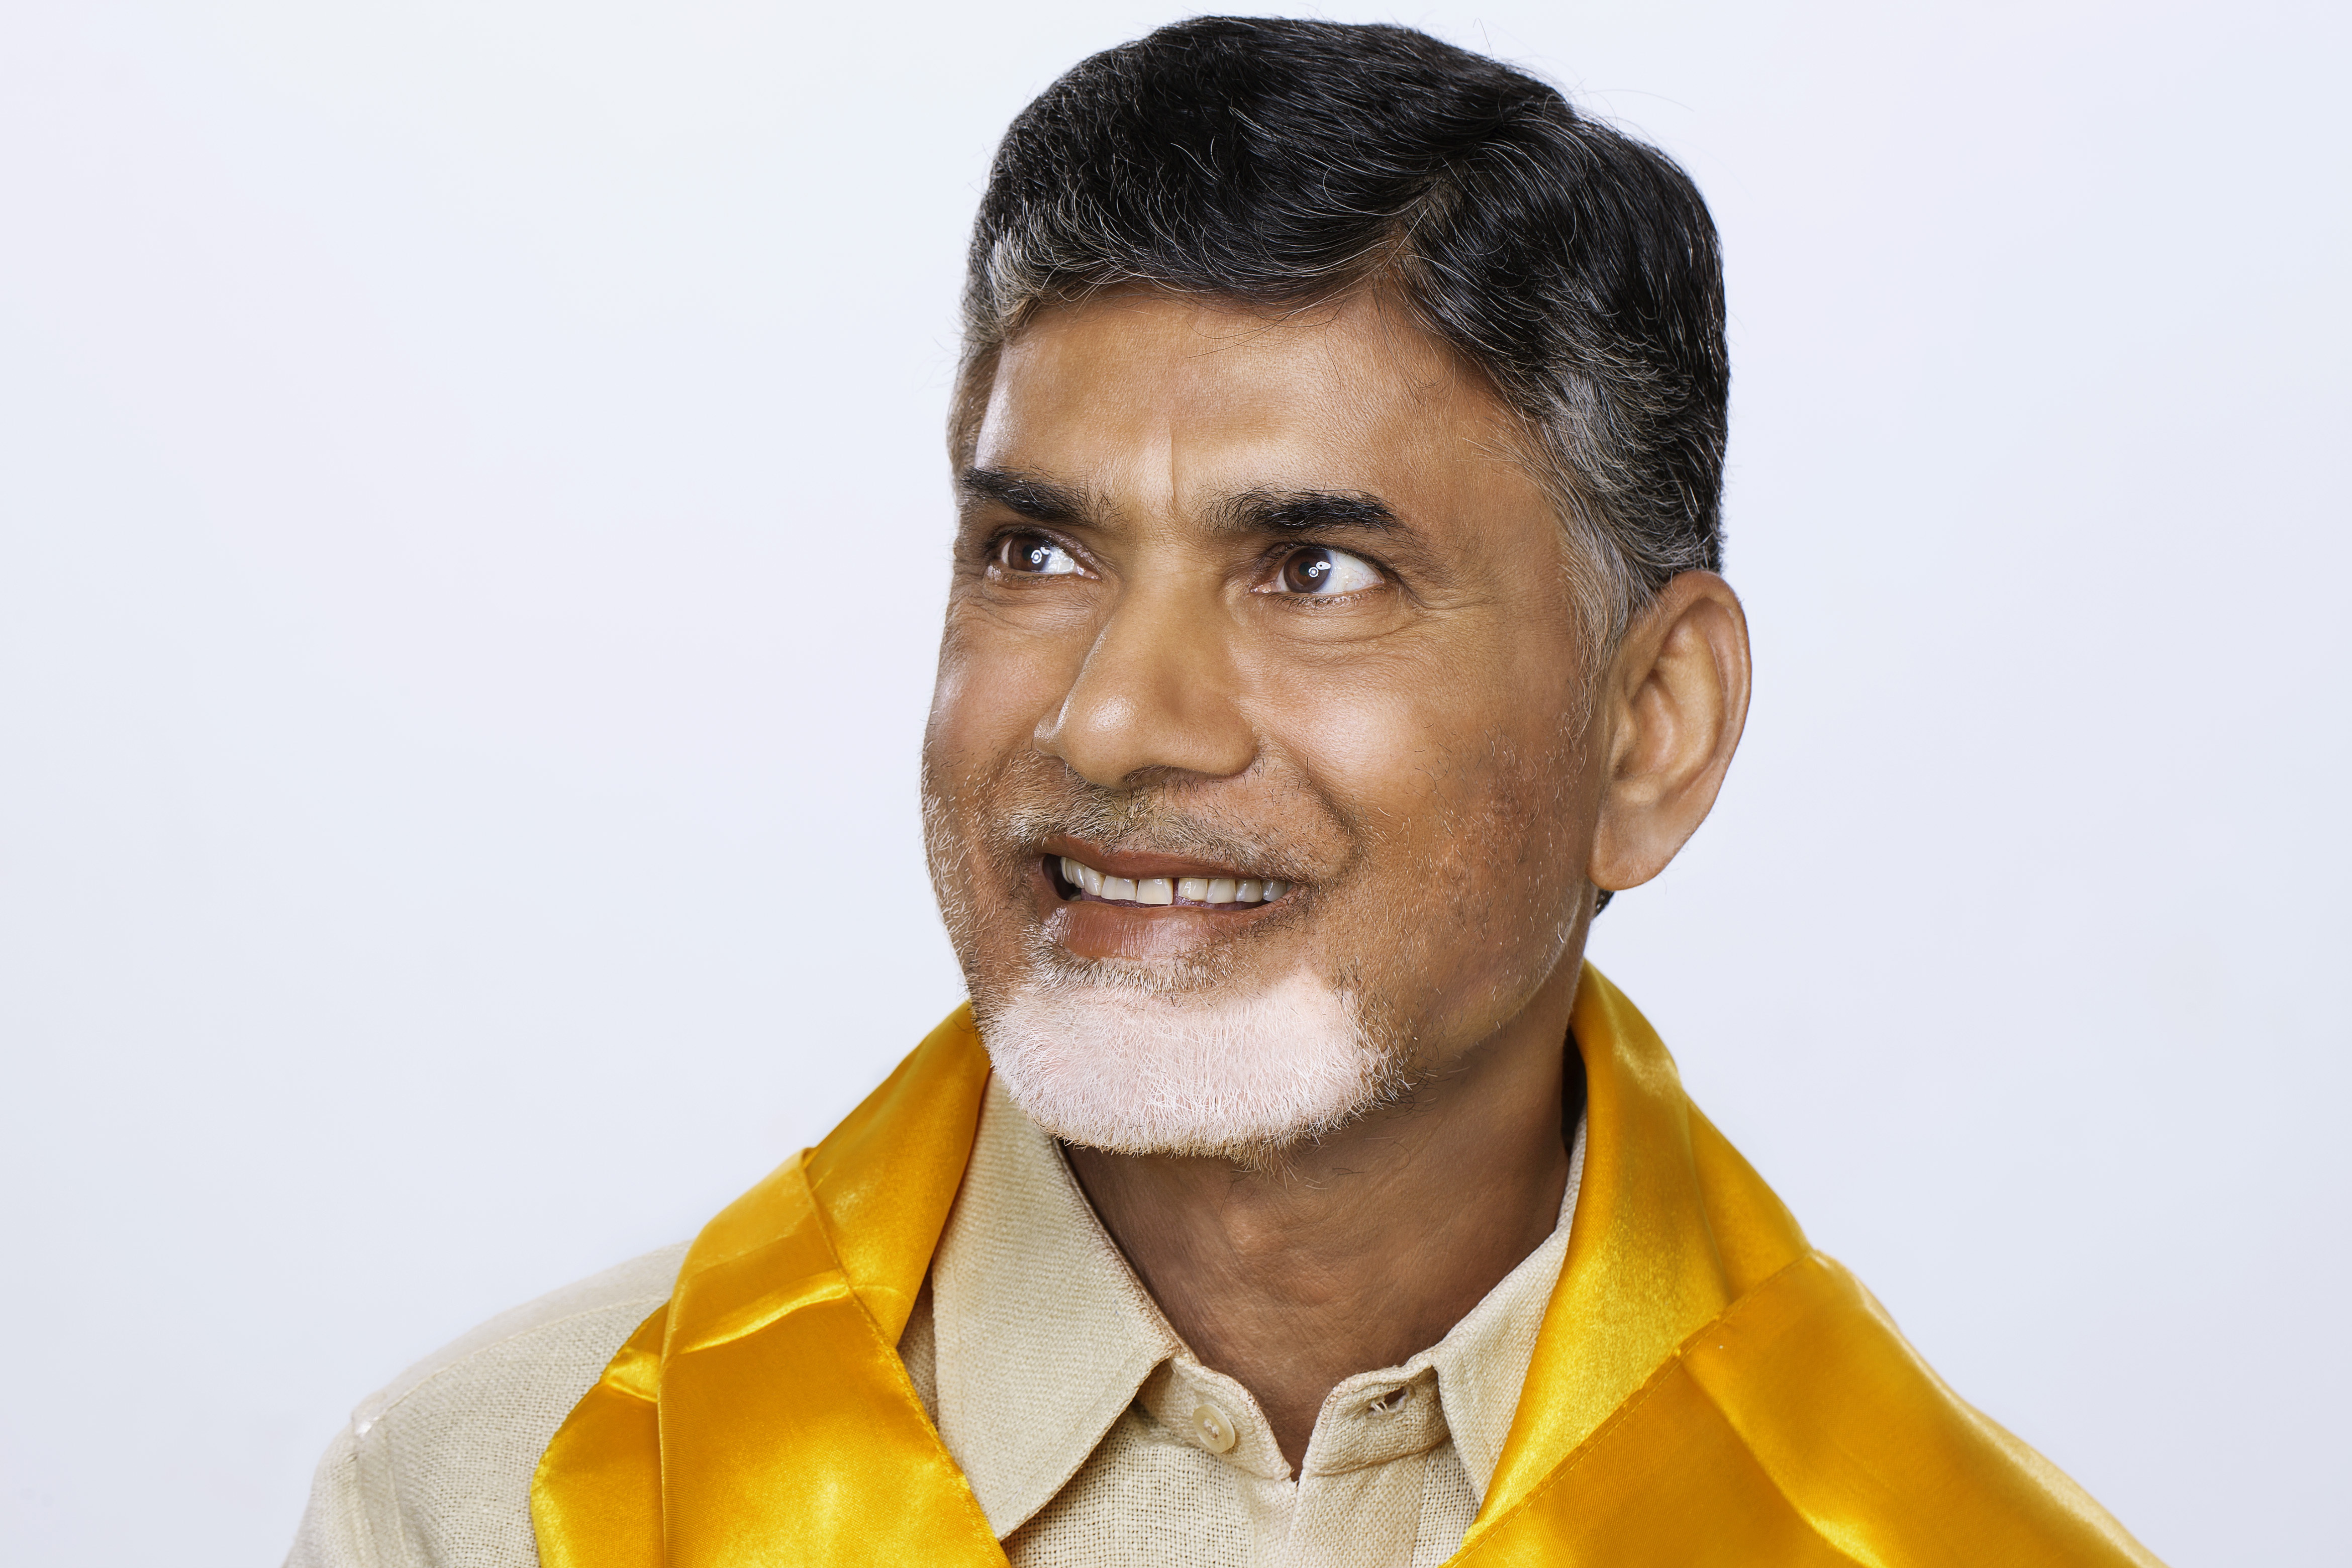 TDP chief Kalyan meet sparks buzz of new tie up  Latest News India   Hindustan Times